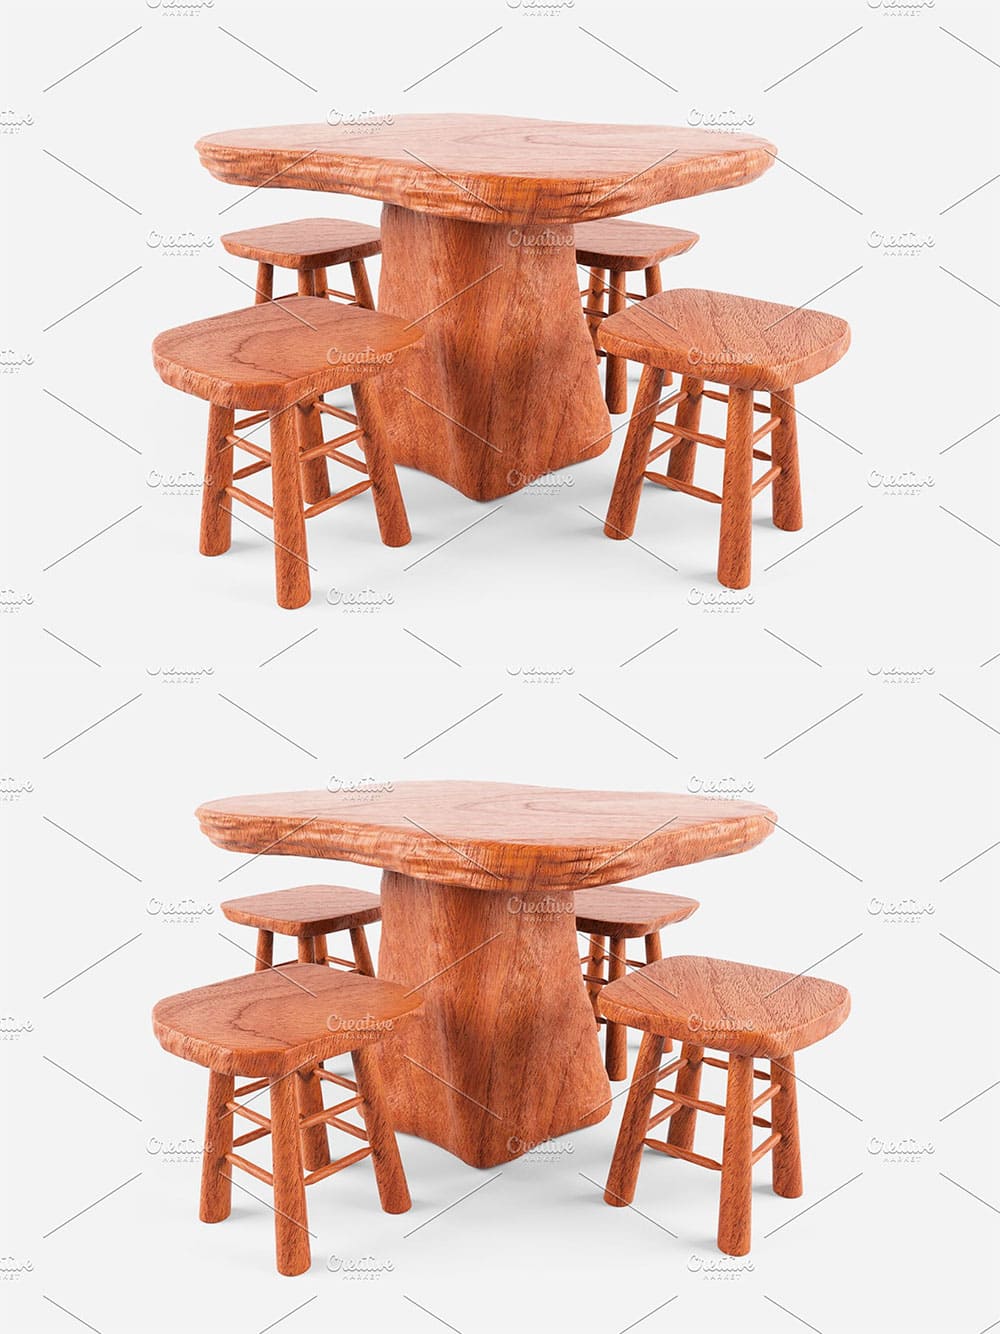 Rustic wood table and chairs, picture for pinterest.